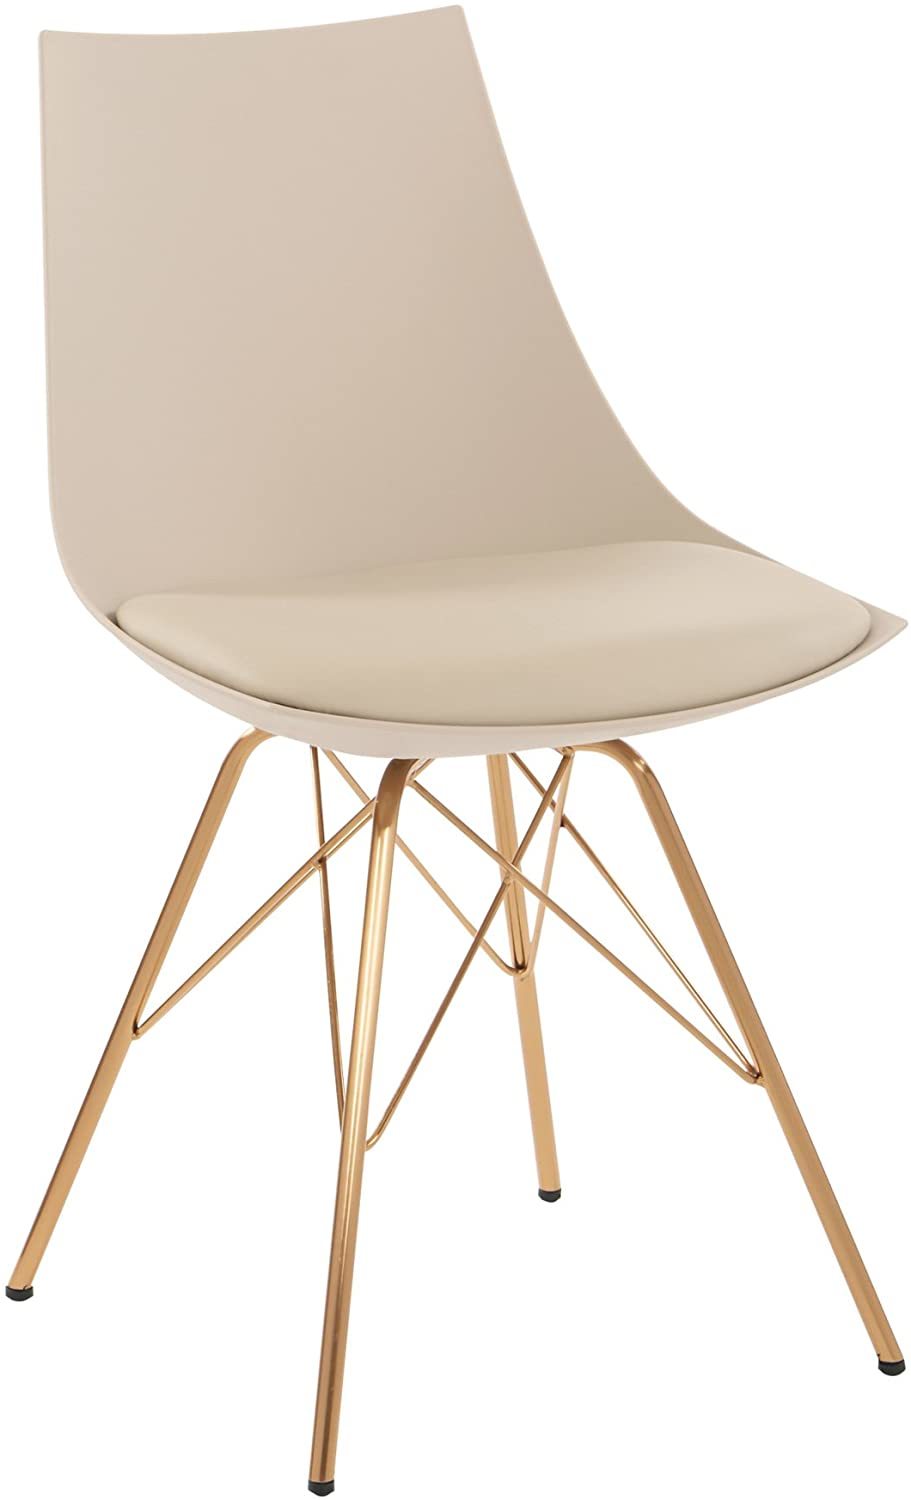 Primary image for OSP Home Furnishings Oakley Mid-Century Modern Bucket Chair, Cream